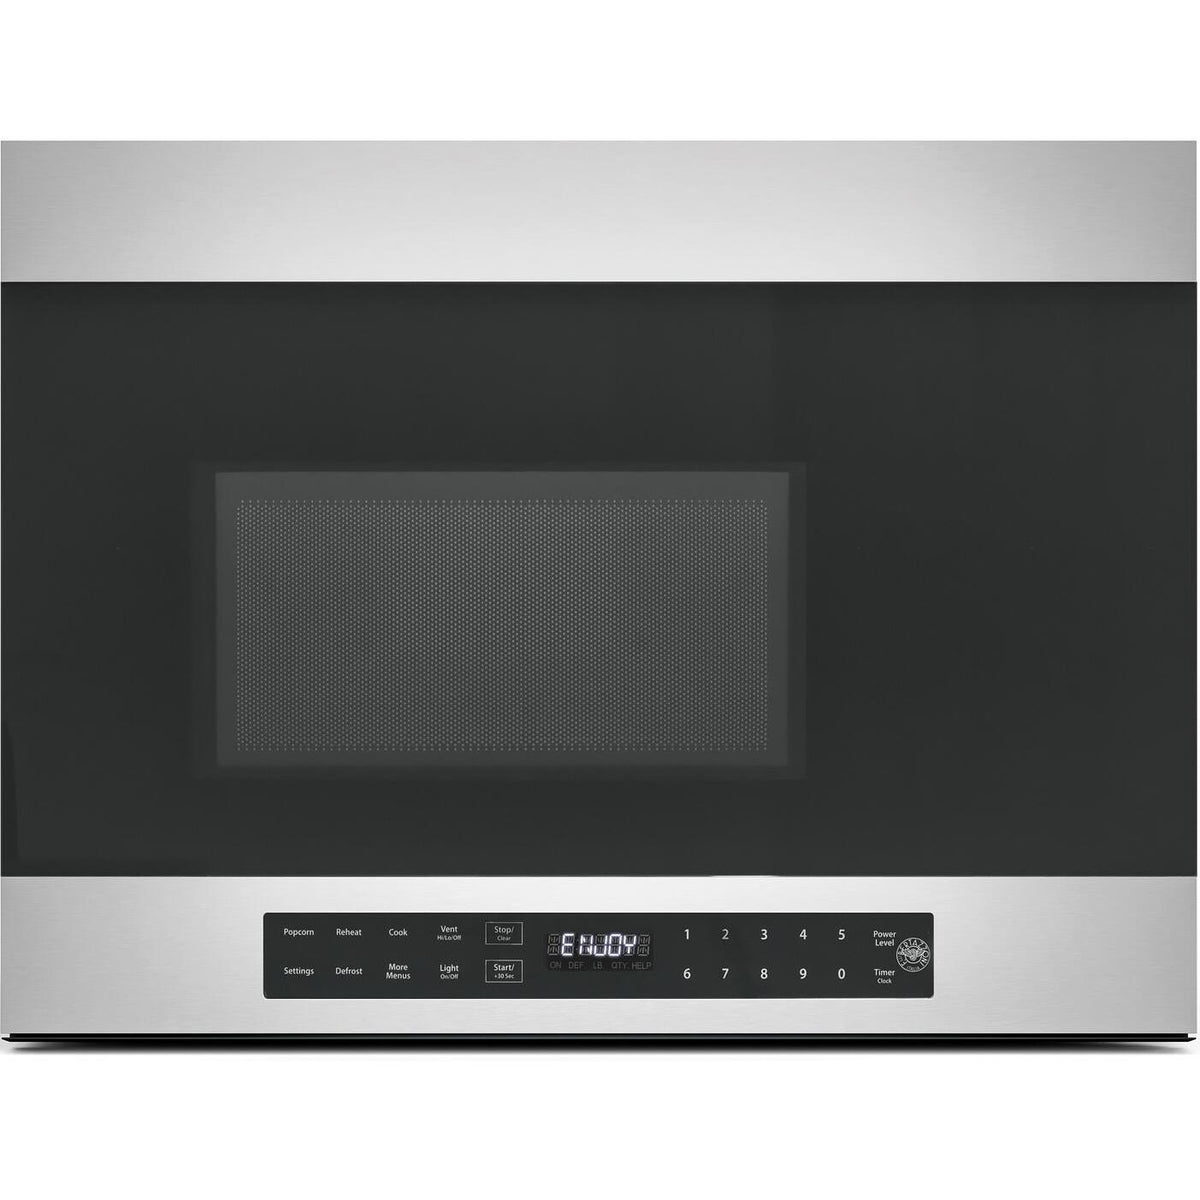 24-inch Over-the-Range Microwave Oven with LED Display KOTR24MXE IMAGE 1